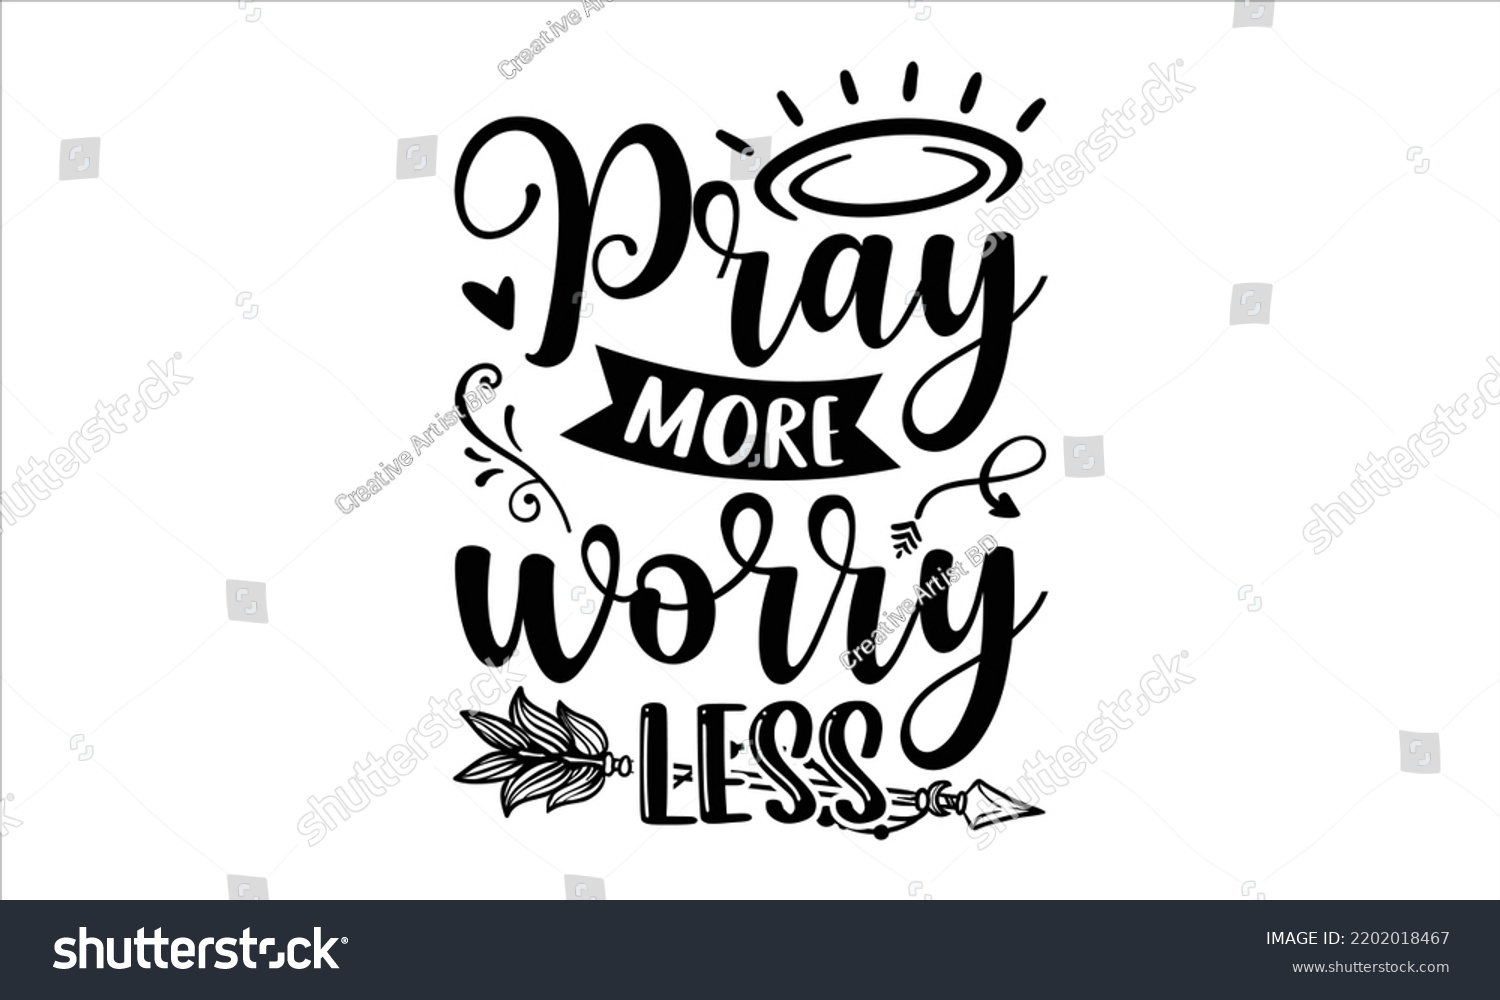 SVG of Pray More Worry Less  - Faith T shirt Design, Hand drawn lettering and calligraphy, Svg Files for Cricut, Instant Download, Illustration for prints on bags, posters svg